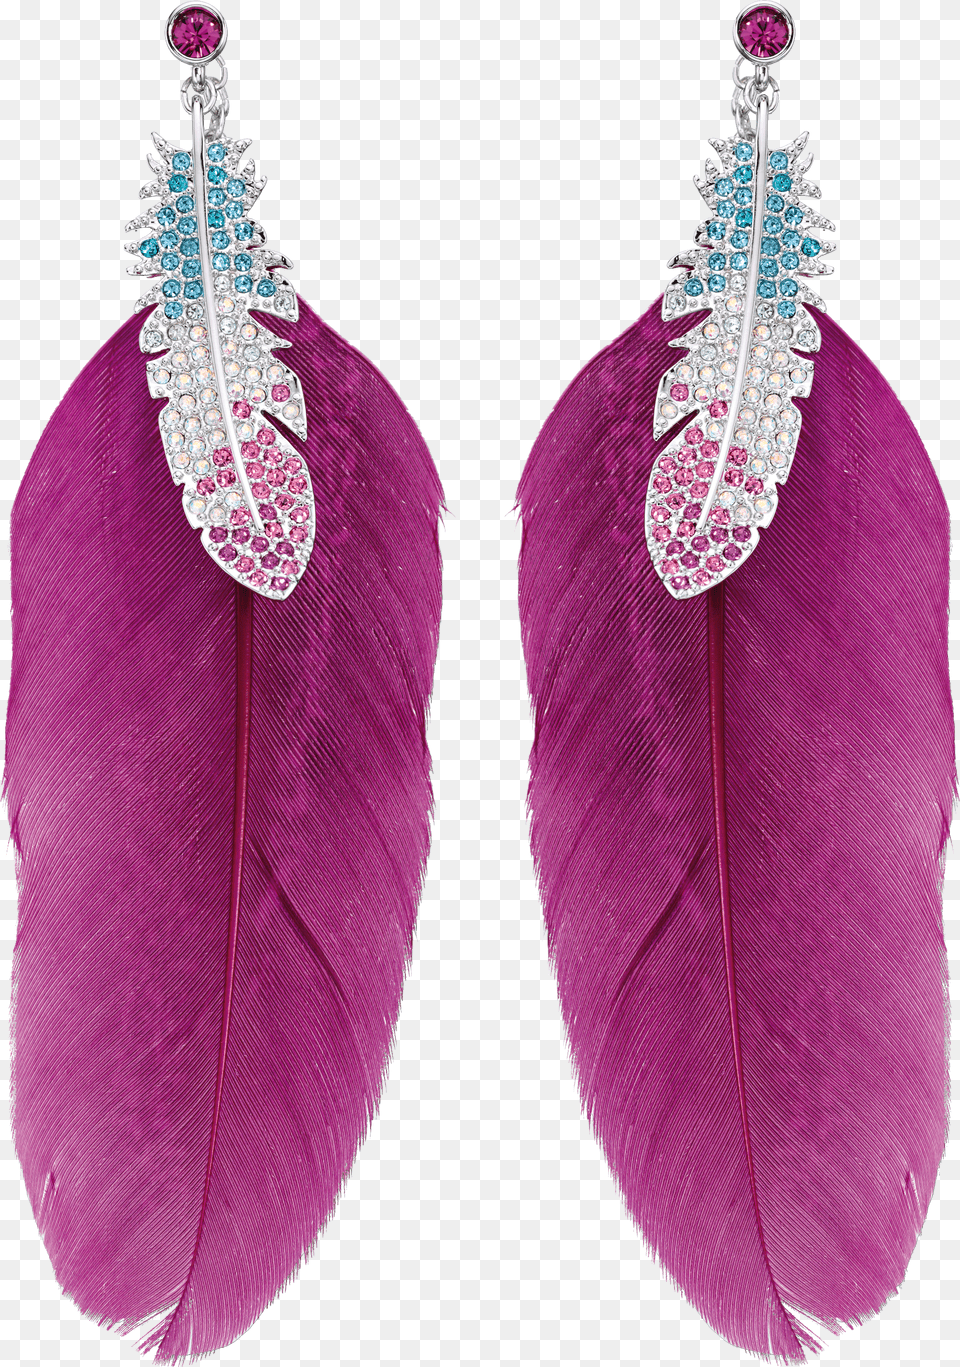 Download Feather Earrings For Feather Earrings Png Image